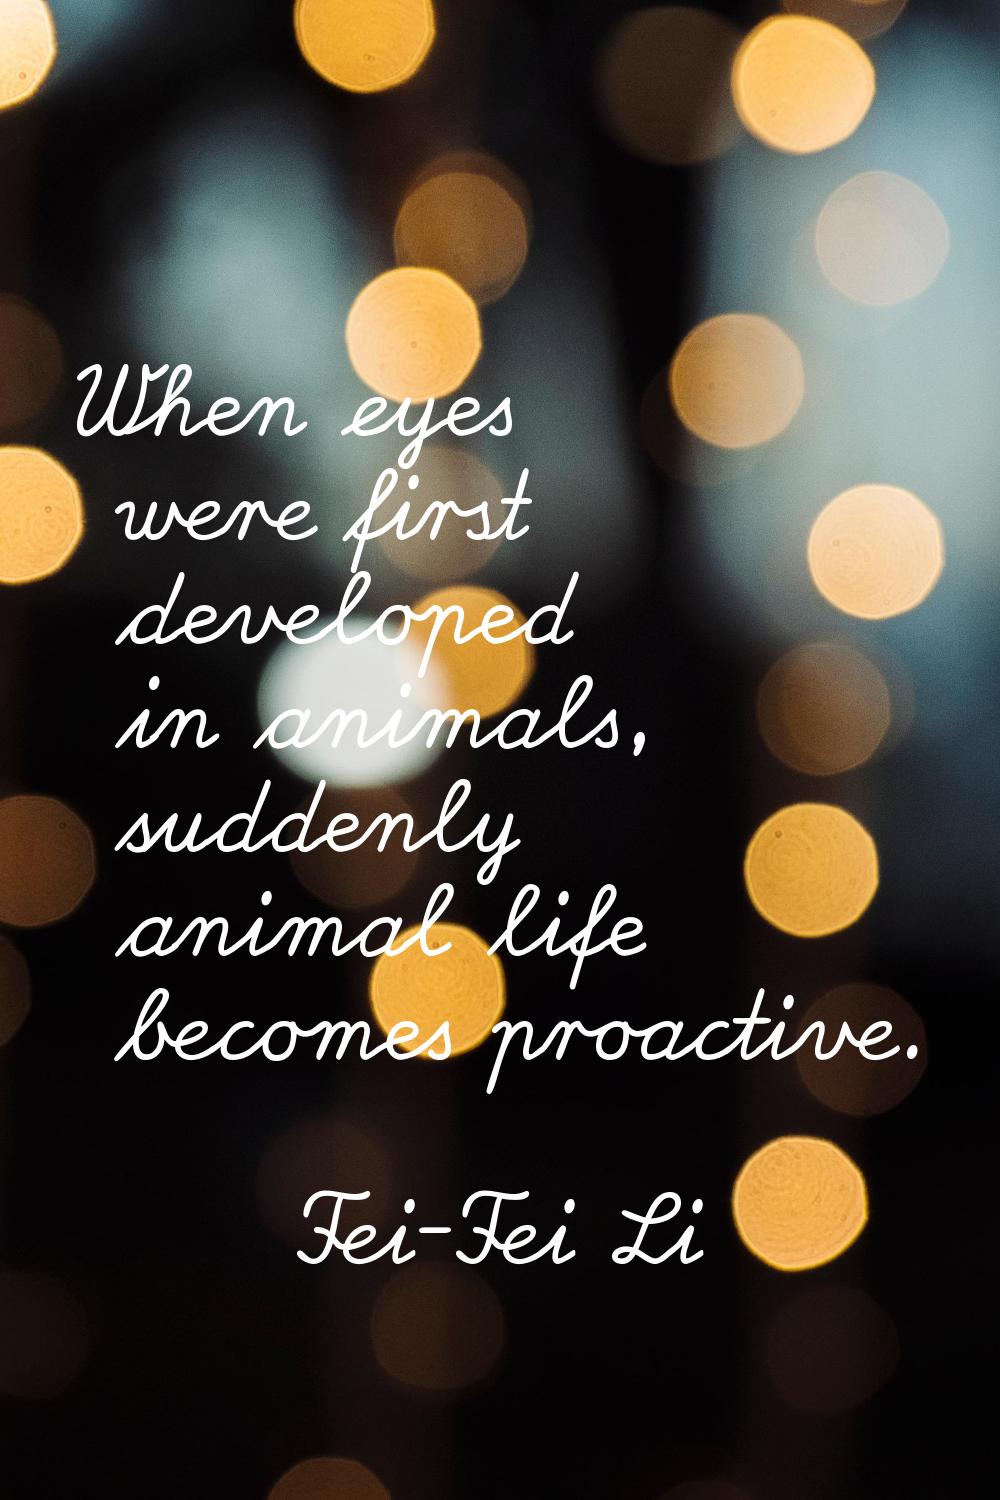 When eyes were first developed in animals, suddenly animal life becomes proactive.